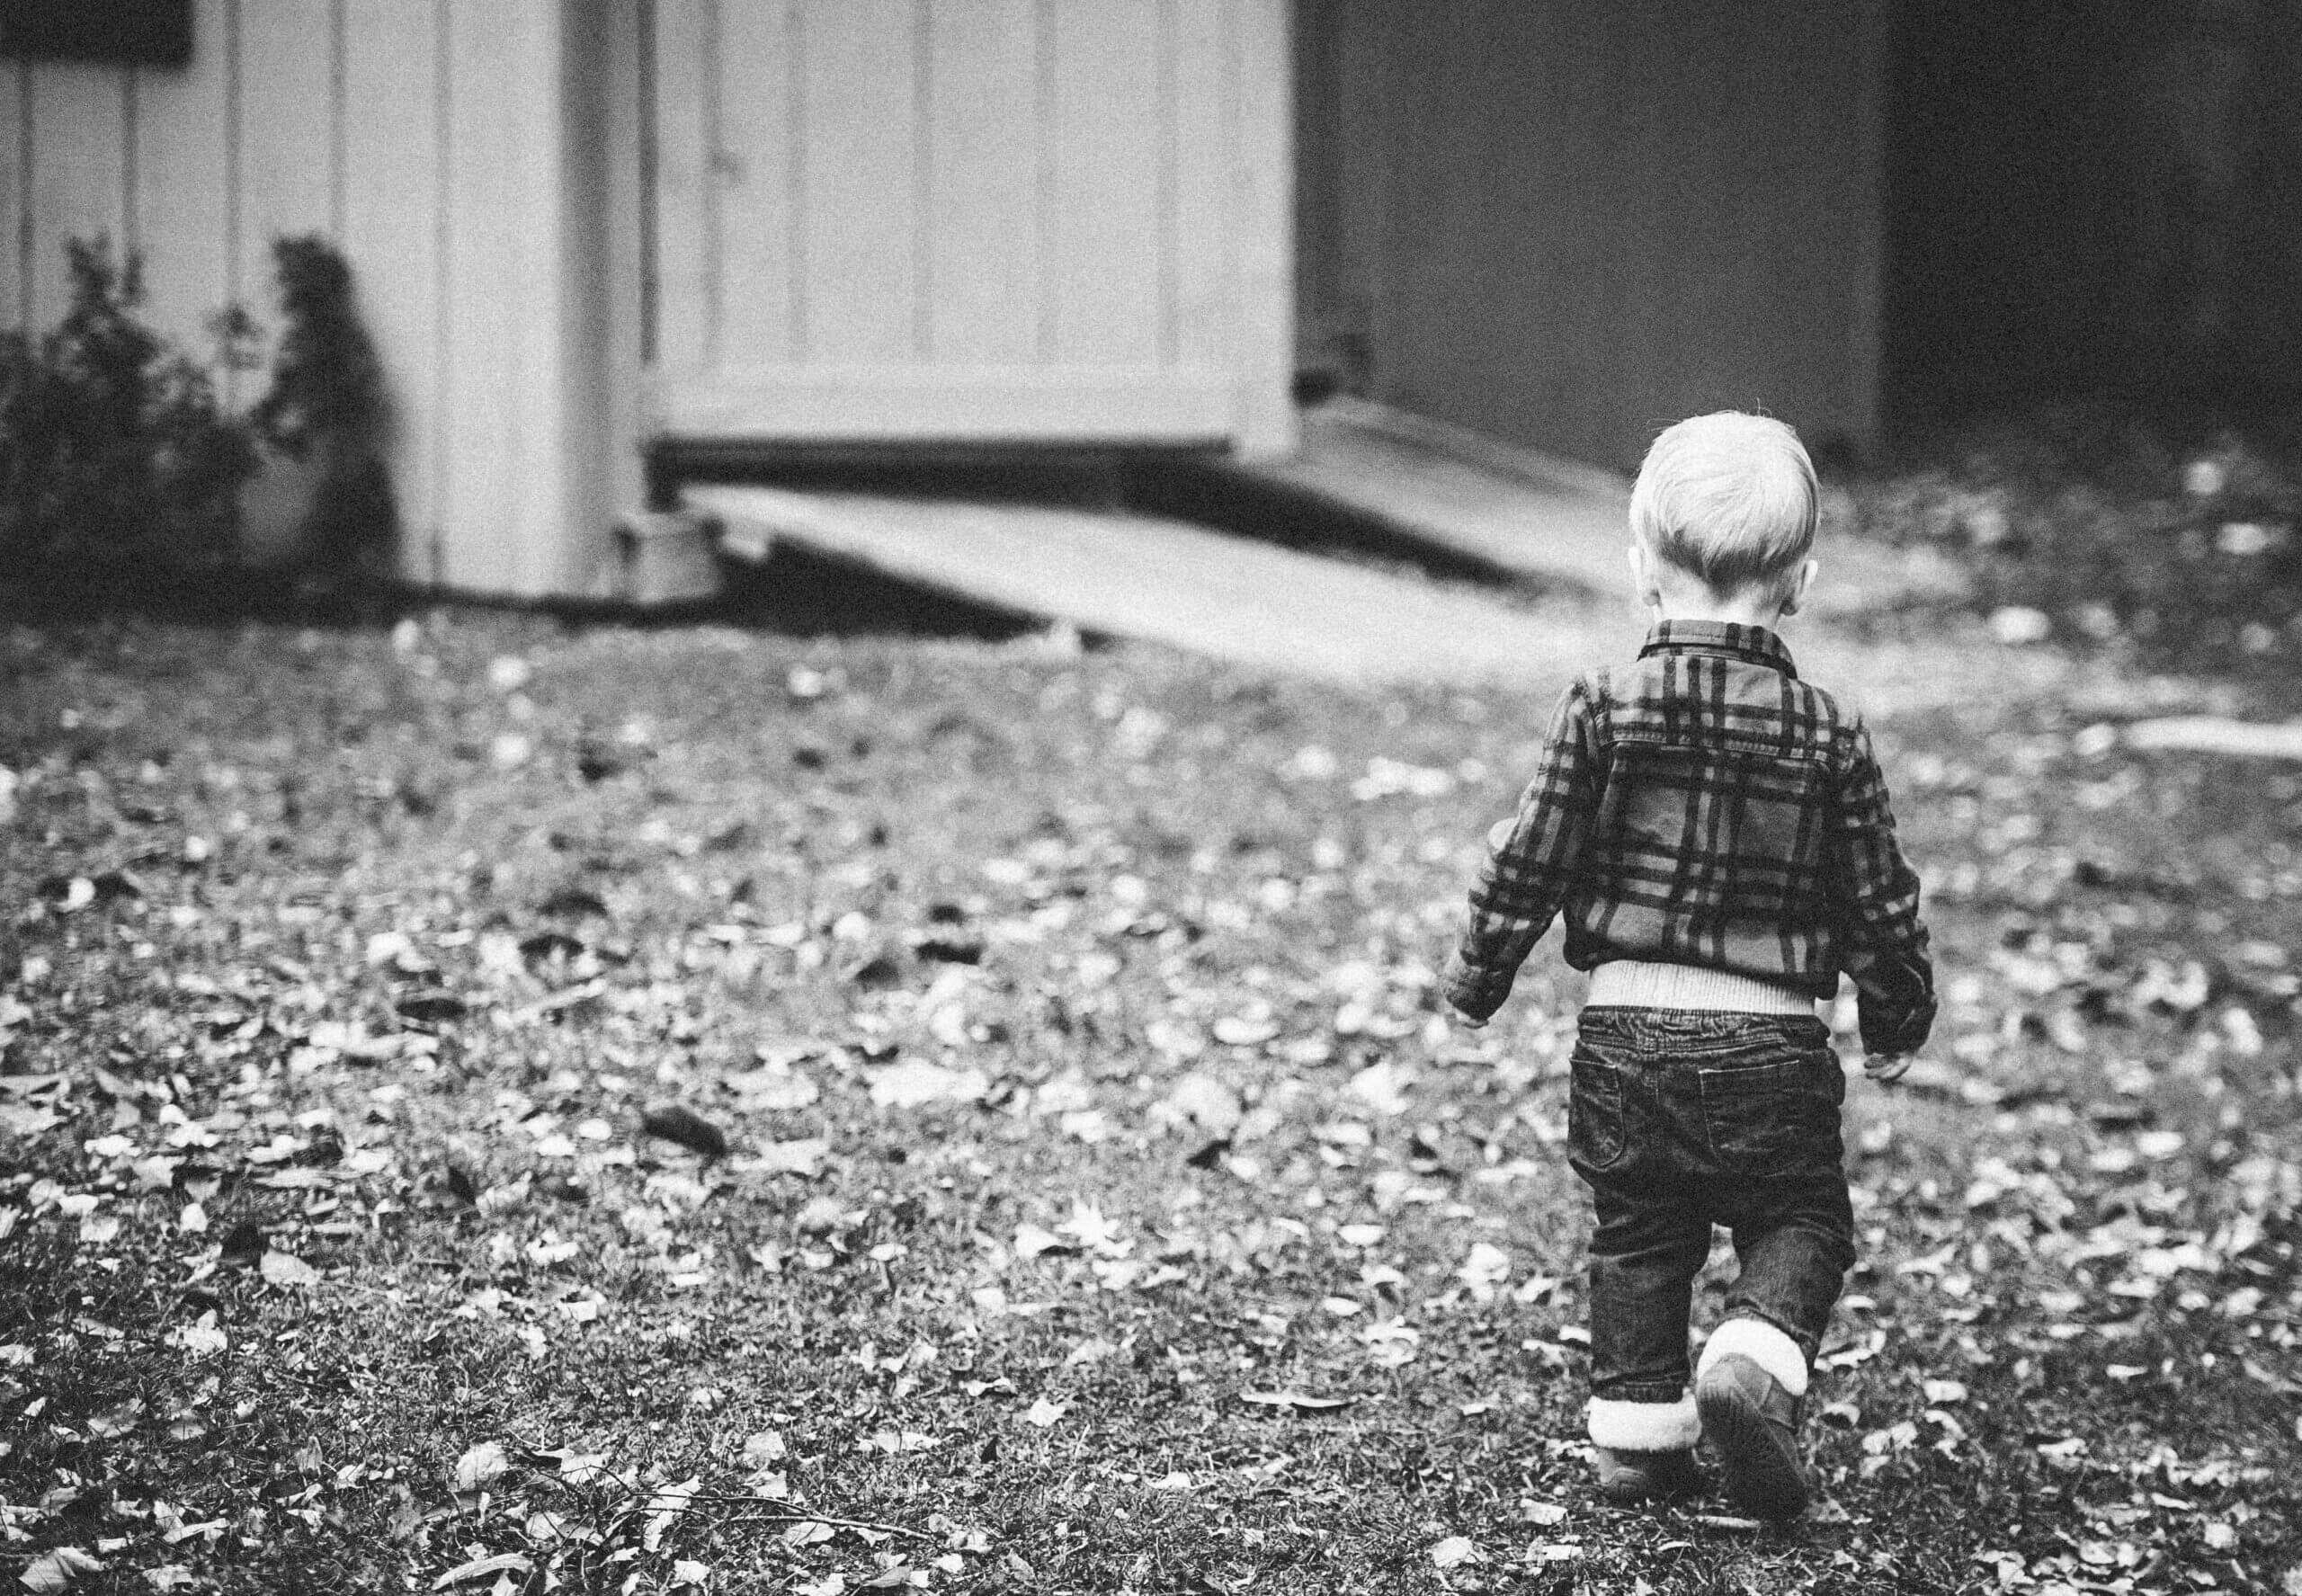 Black and white image of a white blond toddler walking away from the camera towards an open shed door.